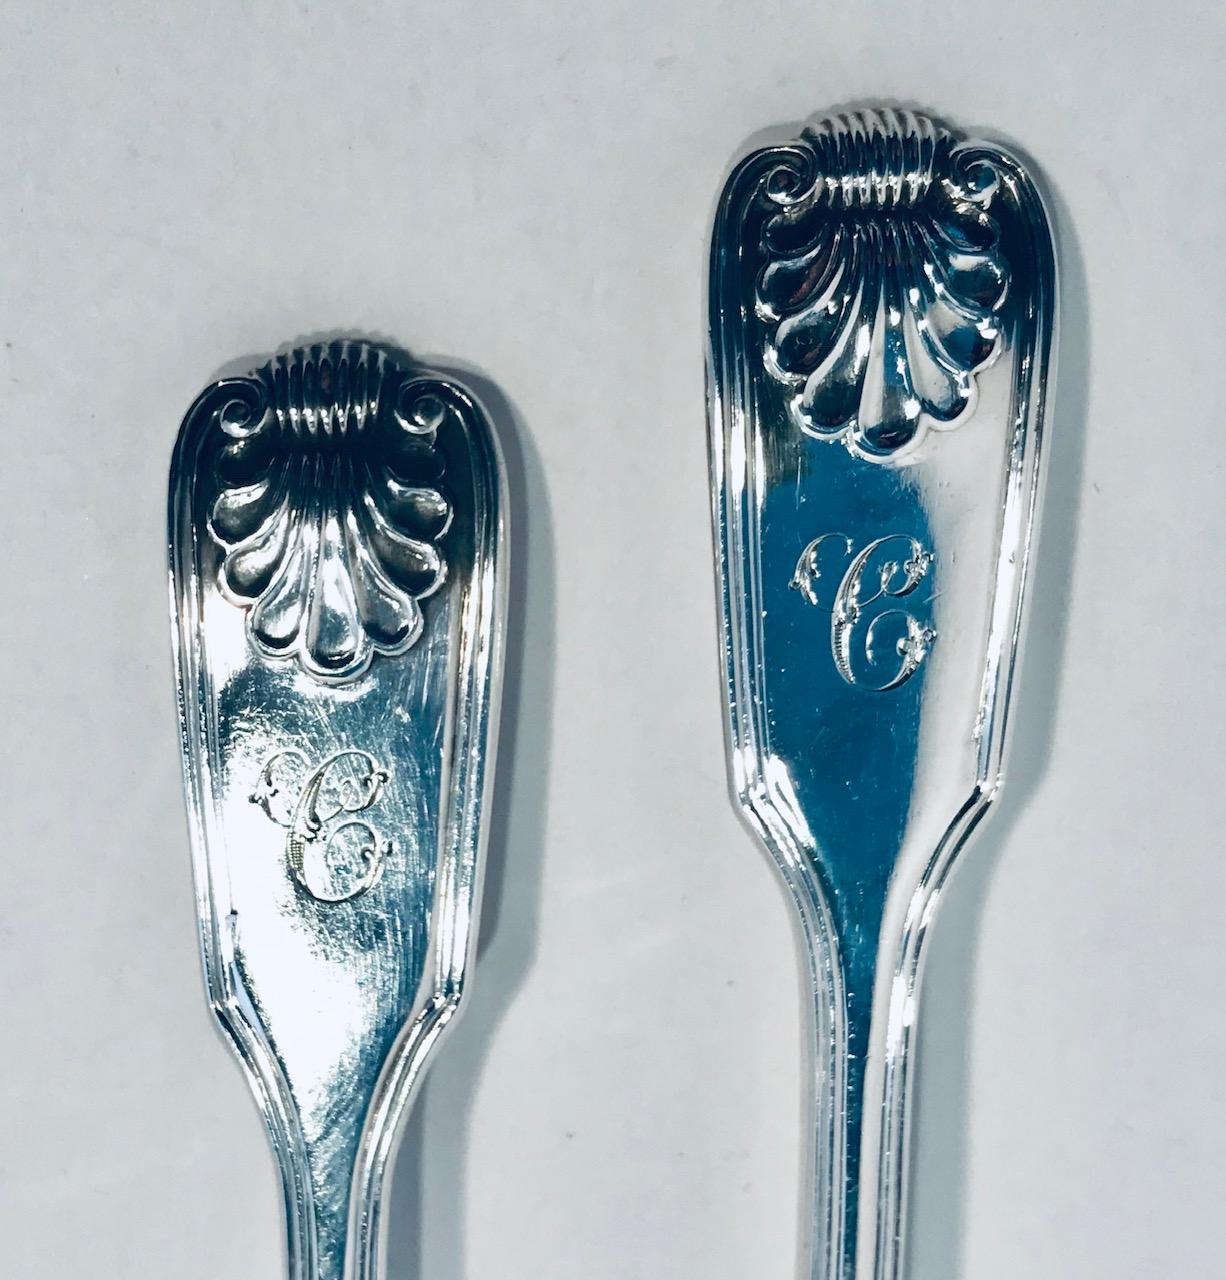 William IV Wm IV Pair of Sterling Condiment/Salt Spoons by William Eaton, London, 1838